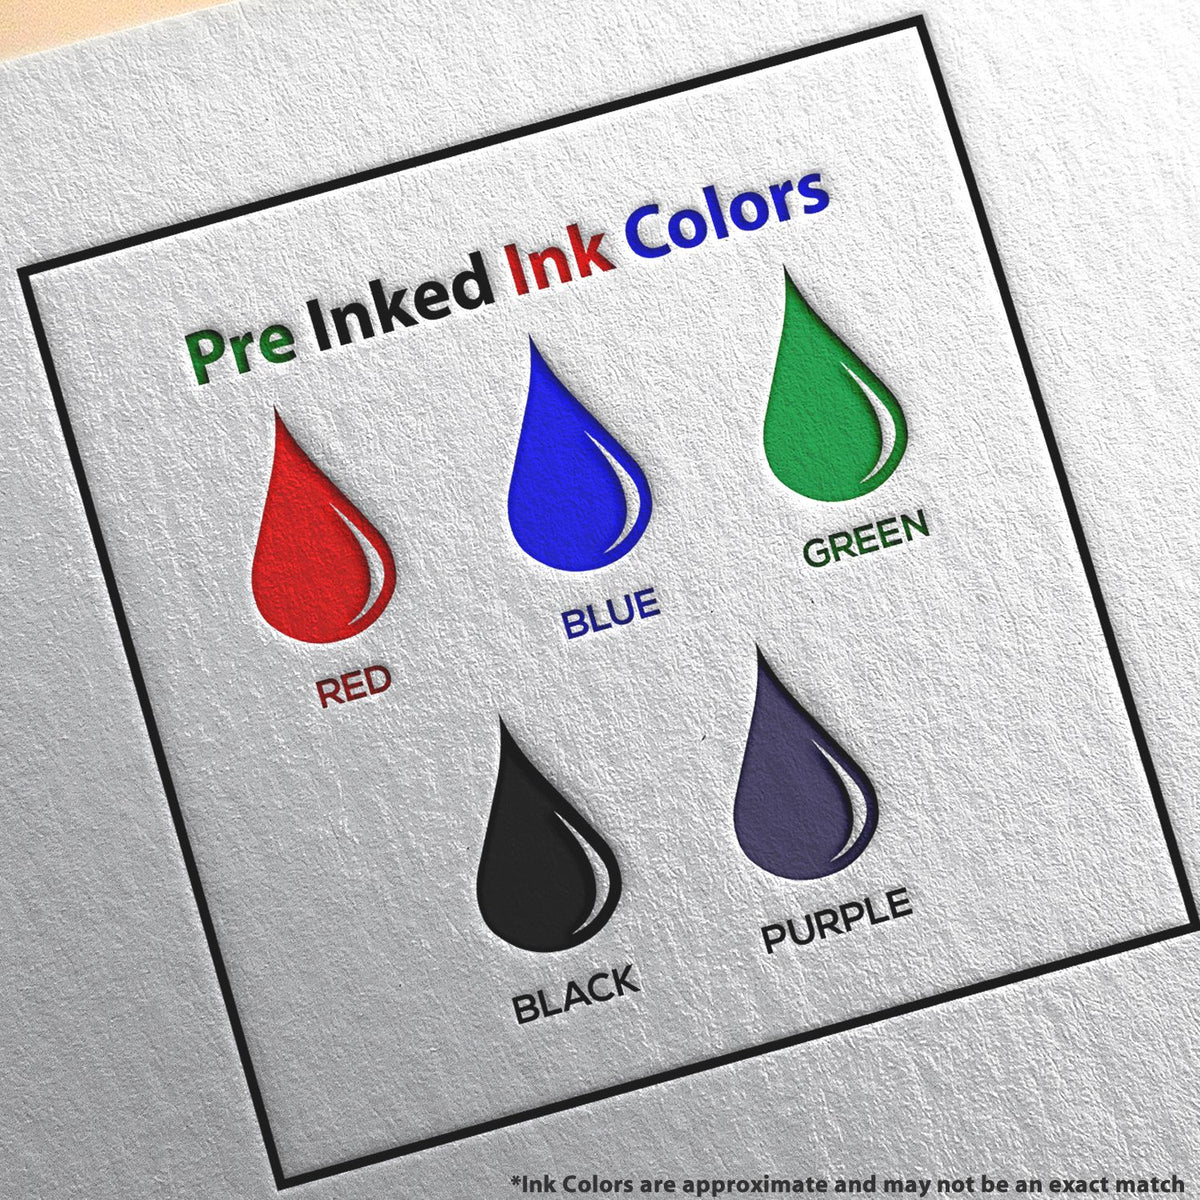 A picture showing the different ink colors or hues available for the Slim Pre-Inked Rectangular Notary Stamp for Rhode Island product.